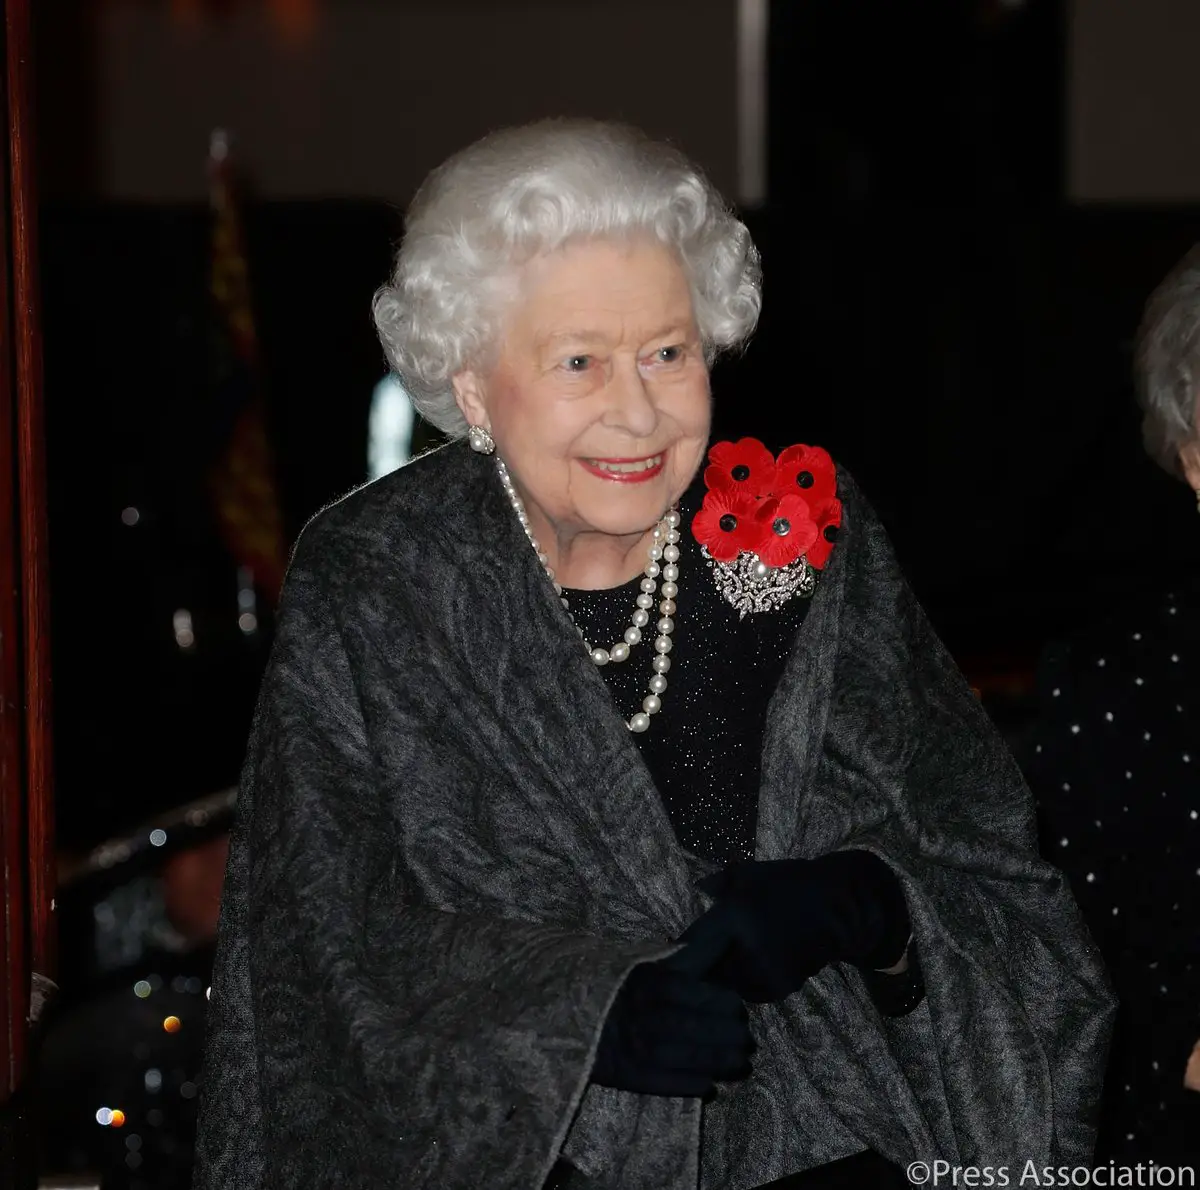 Queen Elizabeth II arrives at the Festival of Remembrance at the Royal Albert Hall tonight